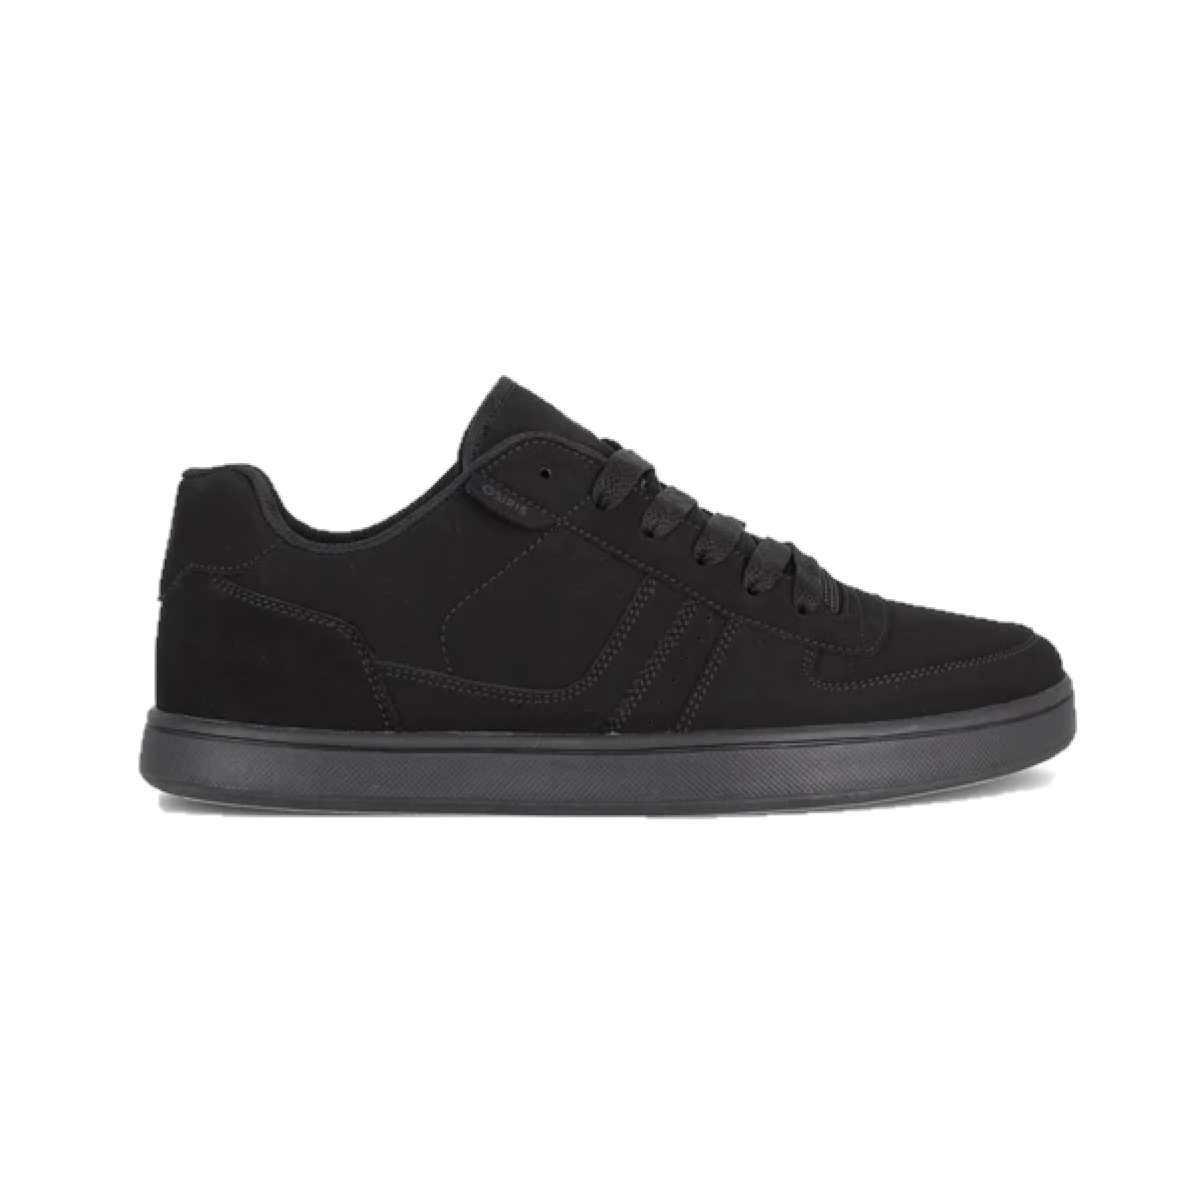 OSIRIS 12682538 RELIC MN'S (Medium) Black/Ops Leather & Canvas Skate Shoes